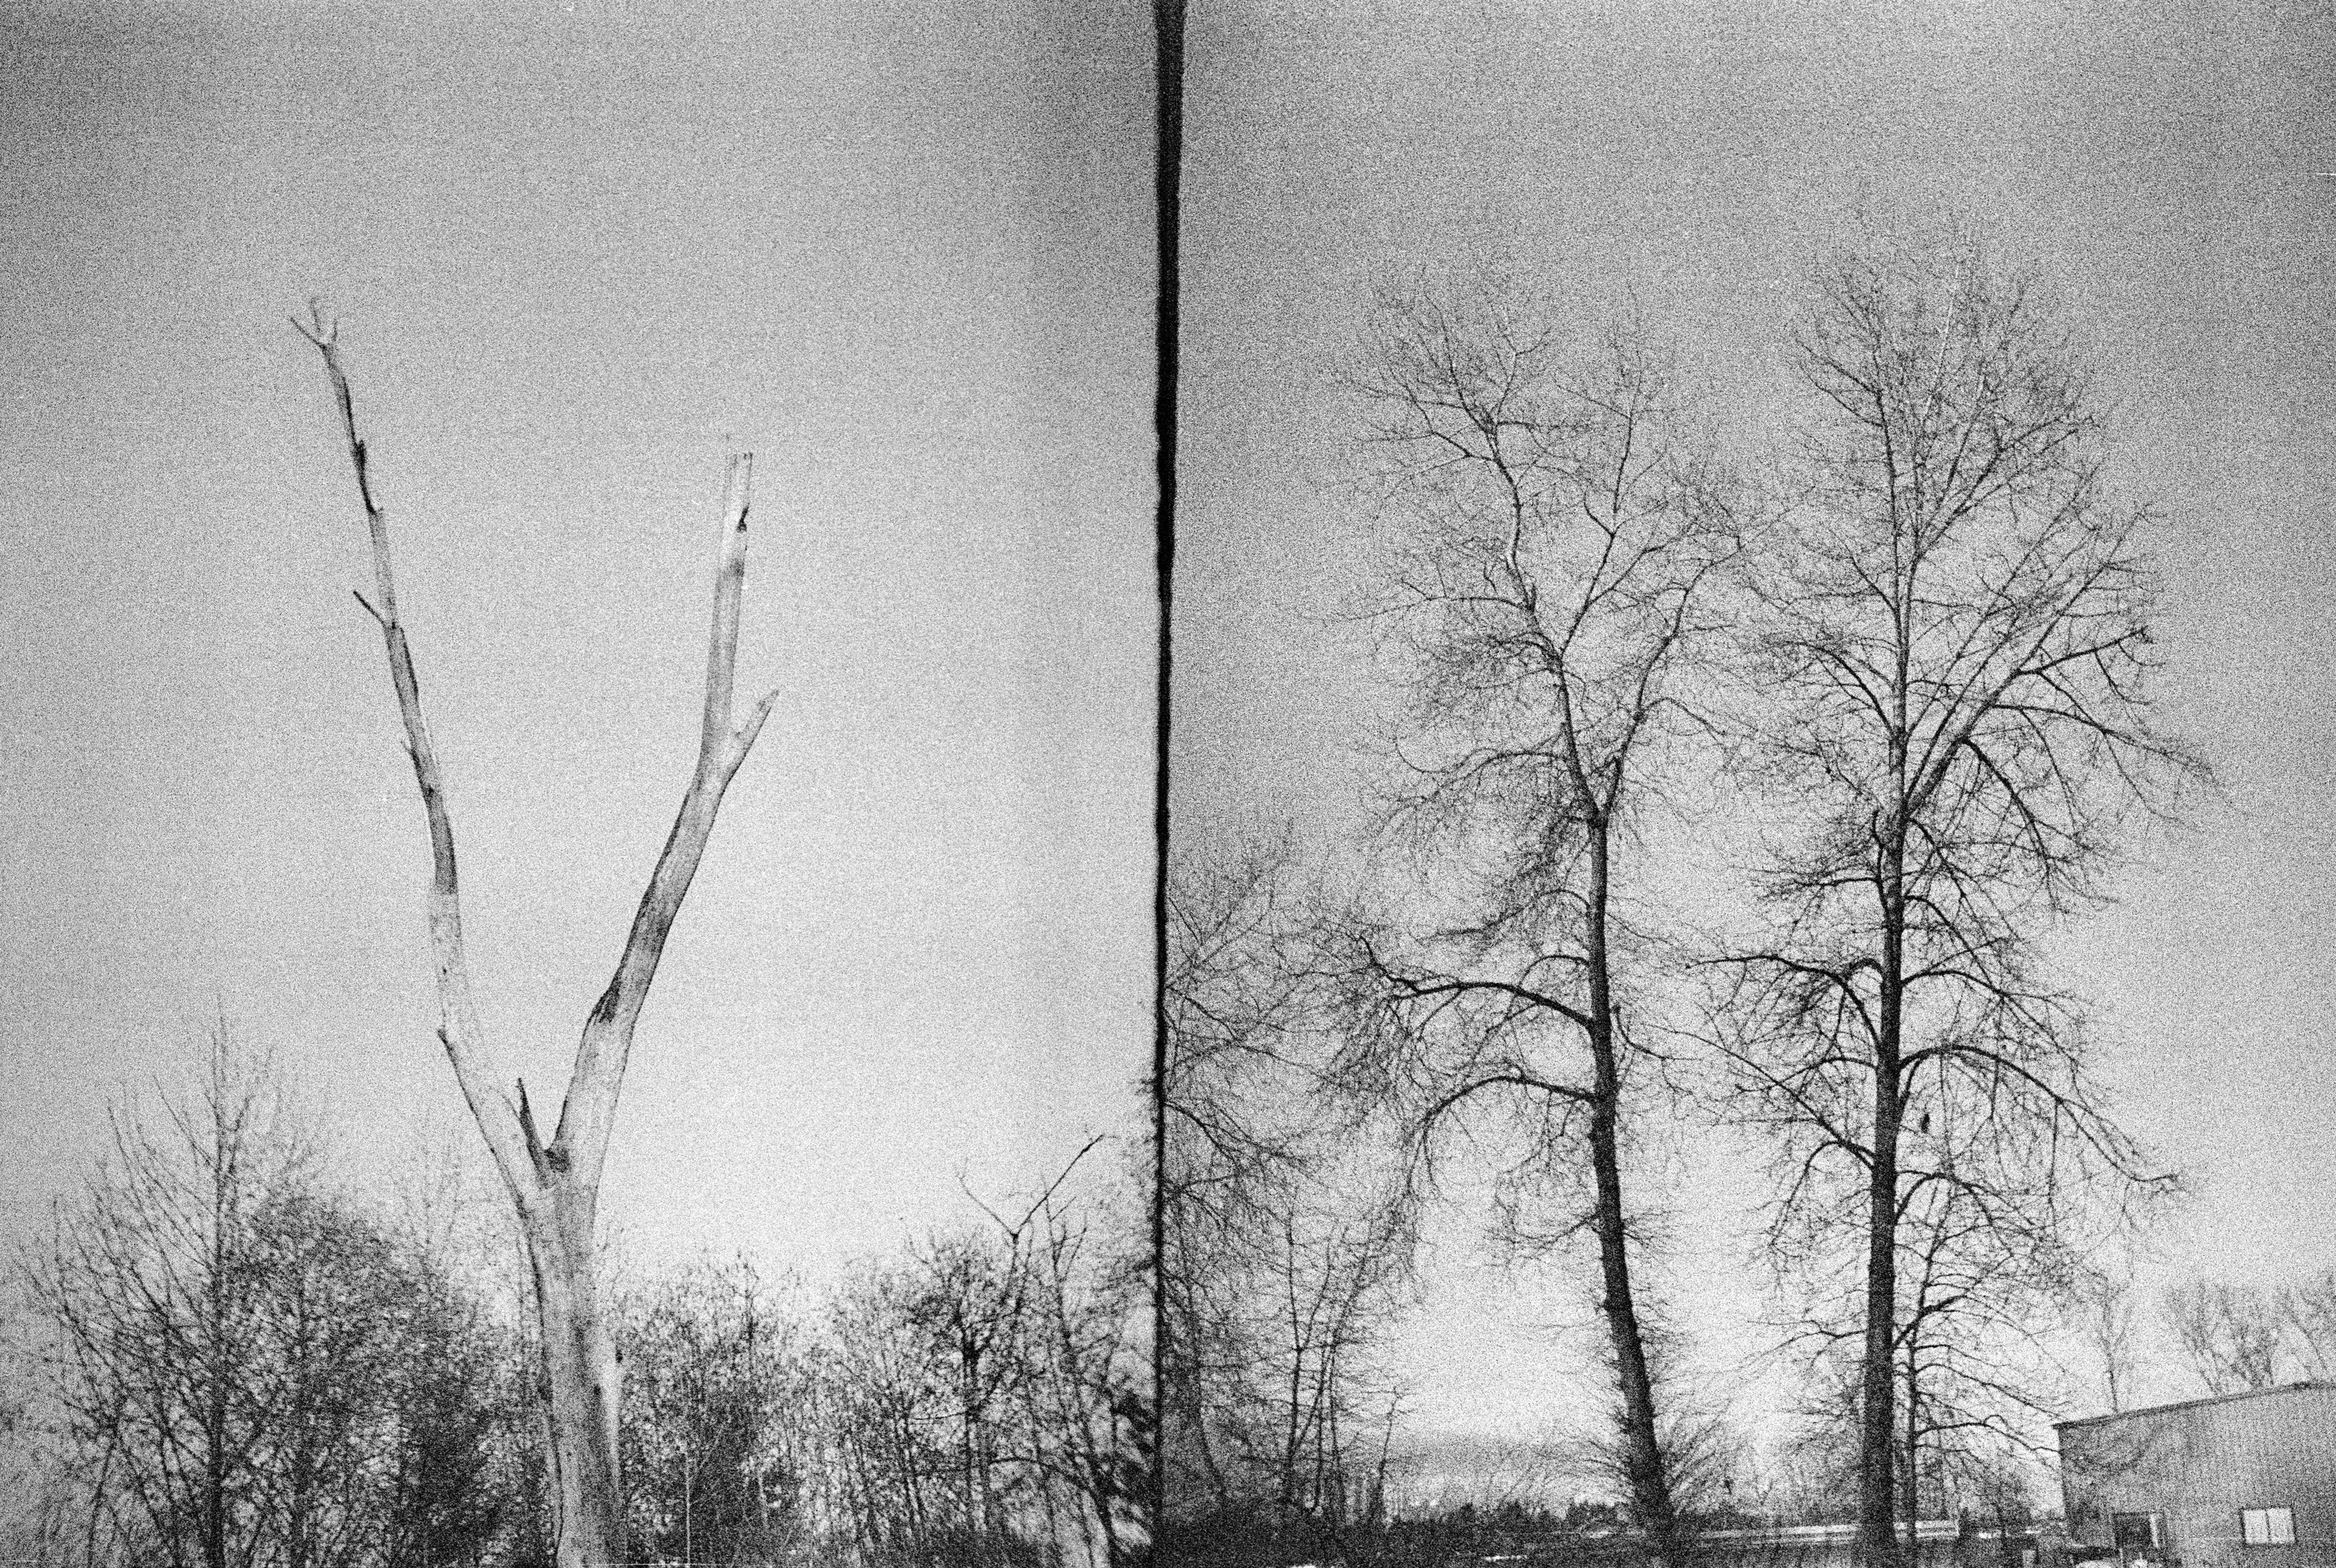 Two grainy photos of trees in black and white side-by-side